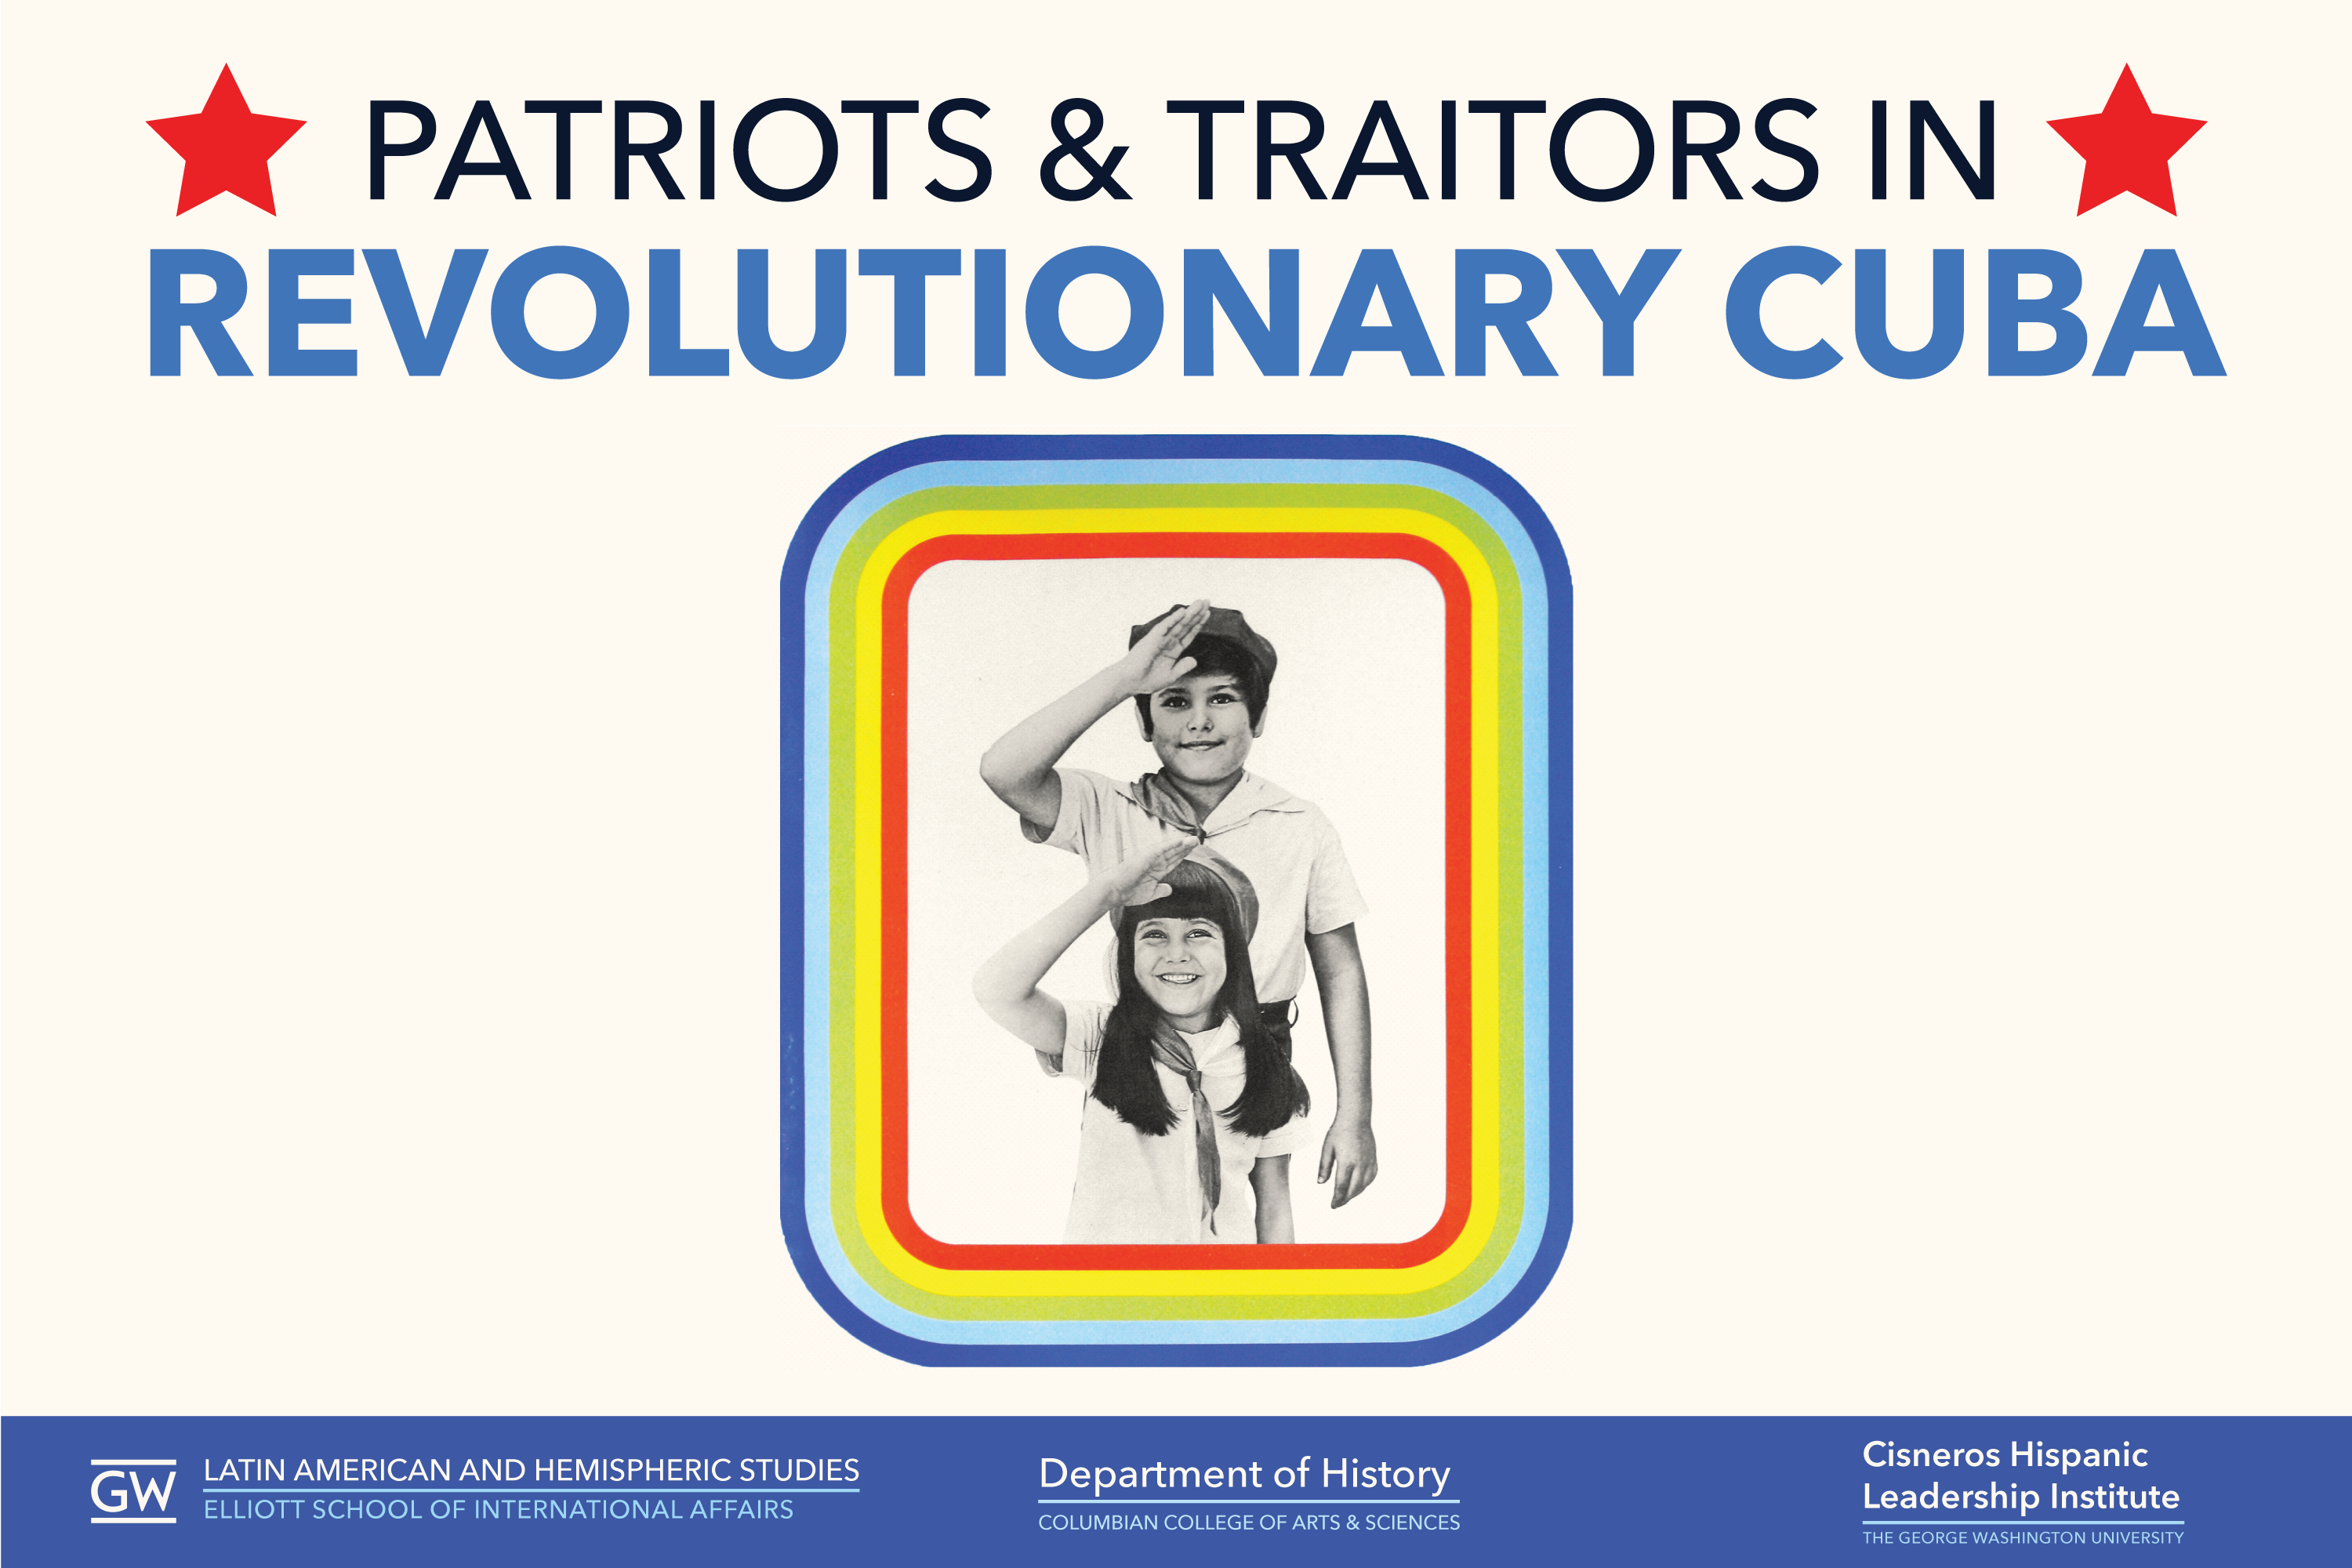 Two children in the middle with the words "Patriots and Traitors in Revolutionary Cuba" on the top